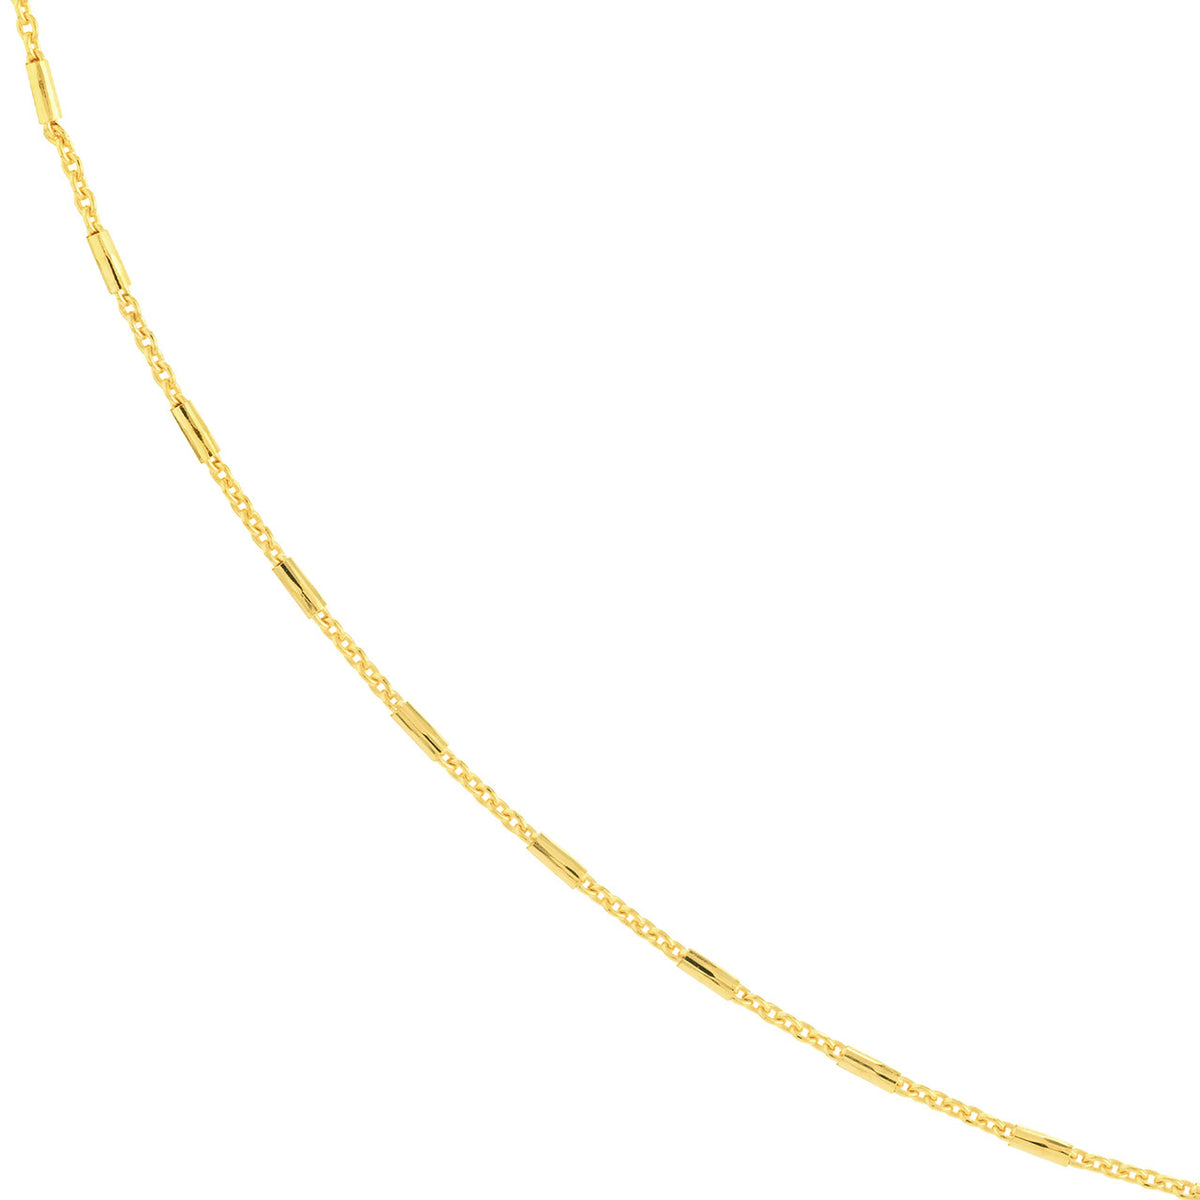 14K Yellow Gold Or White Gold 0.9mm Barrel Saturn Cable Chain Necklace with Spring Ring